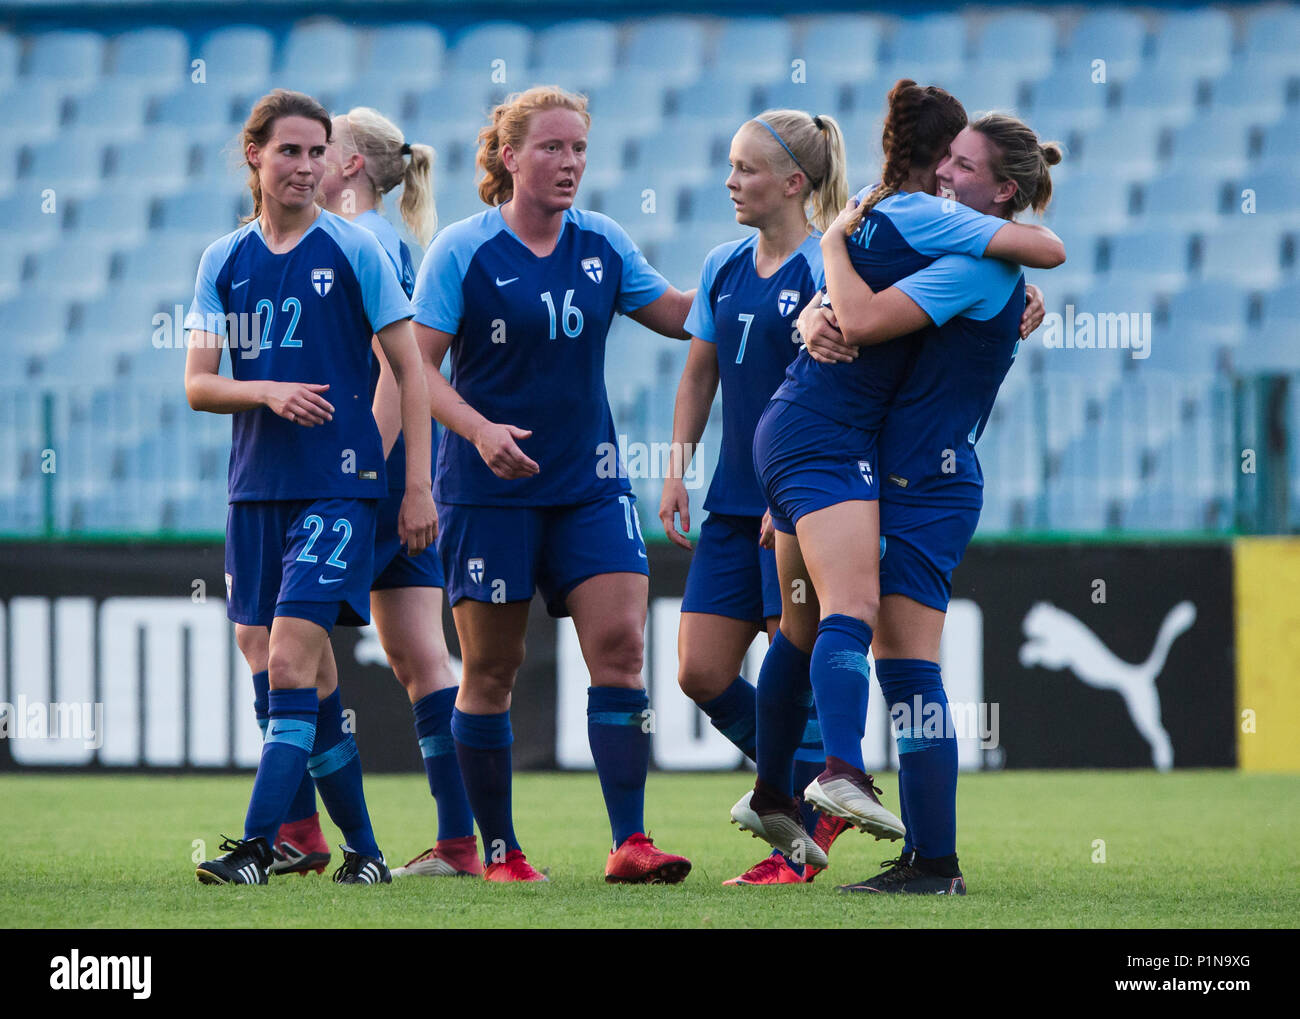 Belgrade, Serbia. 12th June 2018. Defender Tiia Peltonen of Finland, Defender Anna Westerlund of Finland, Forward Adelina Engman of Finland celebrate the victory with their team mate Credit: Nikola Krstic/Alamy Live News Stock Photo